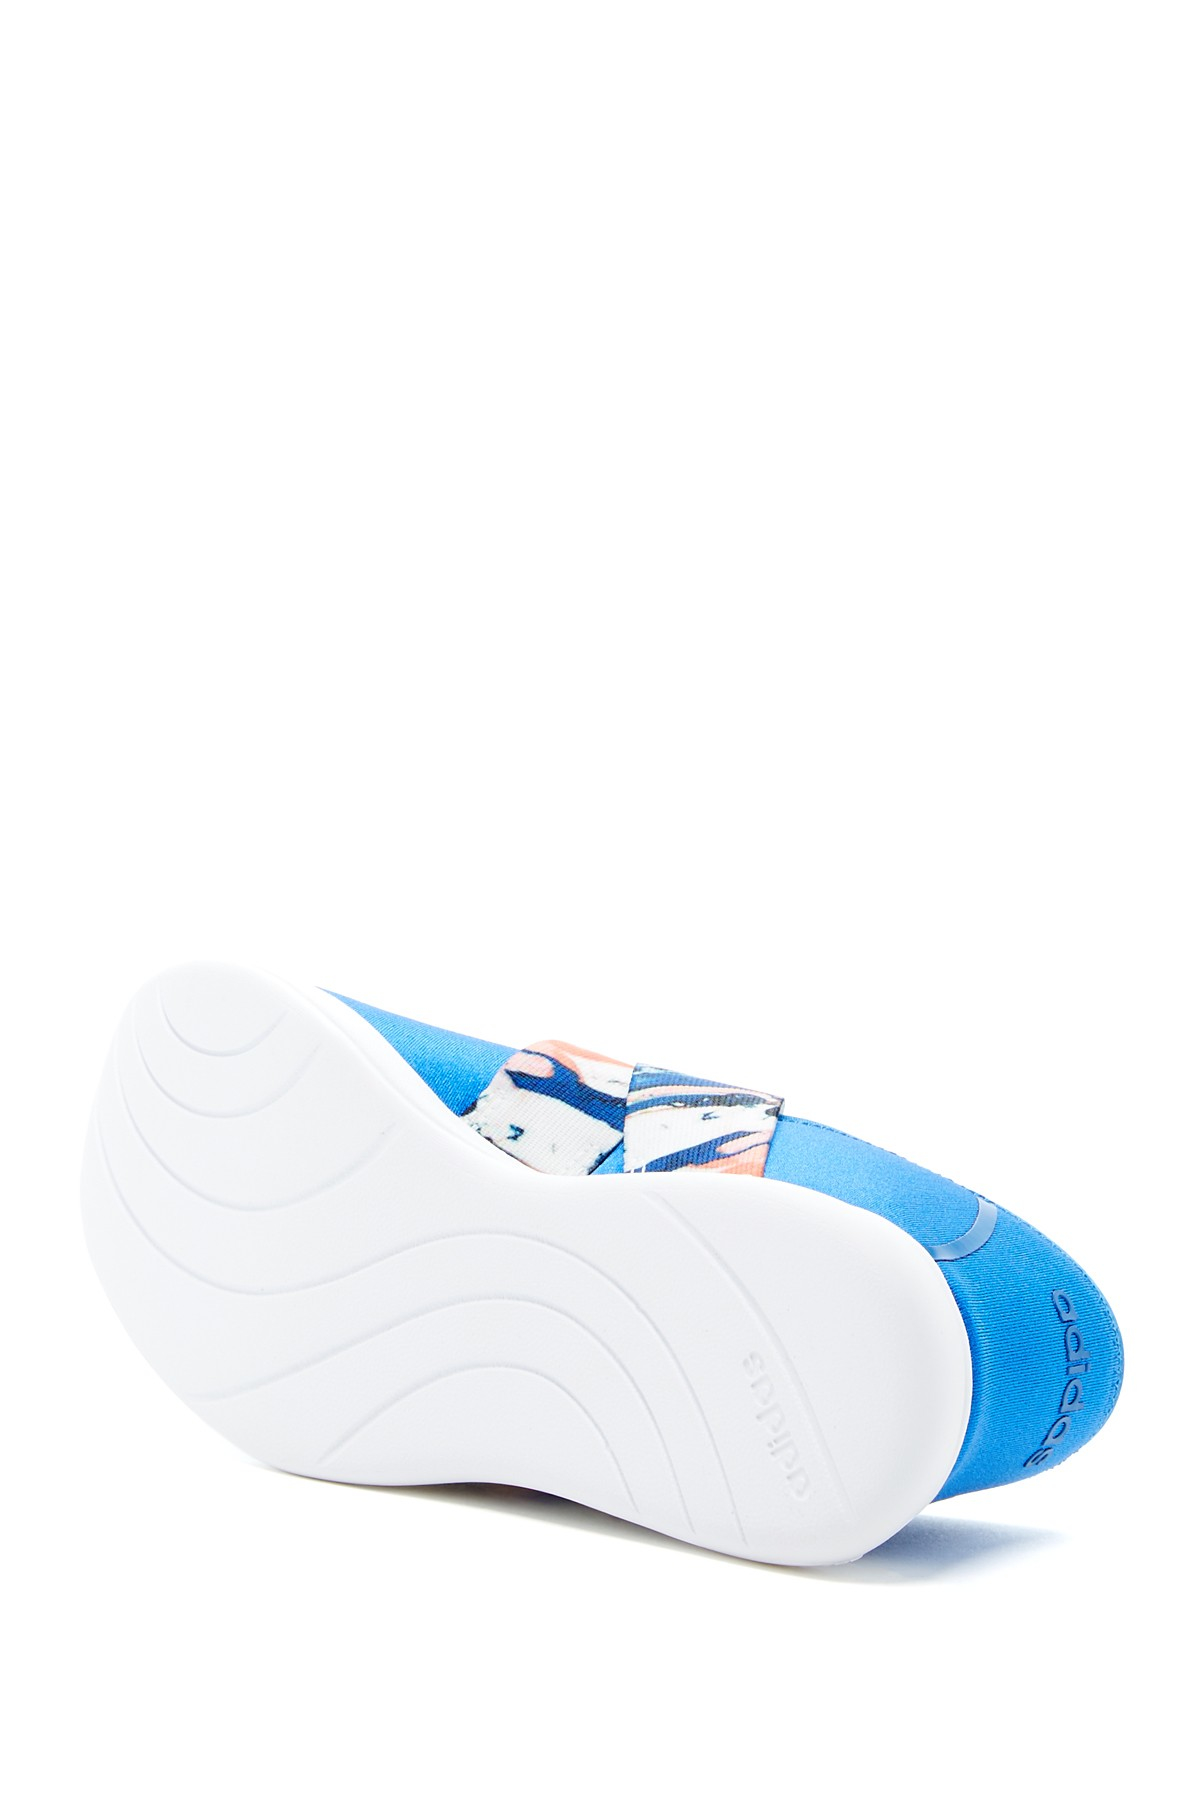 adidas Originals Synthetic Cloudfoam Pure Mary Jane in Blue | Lyst